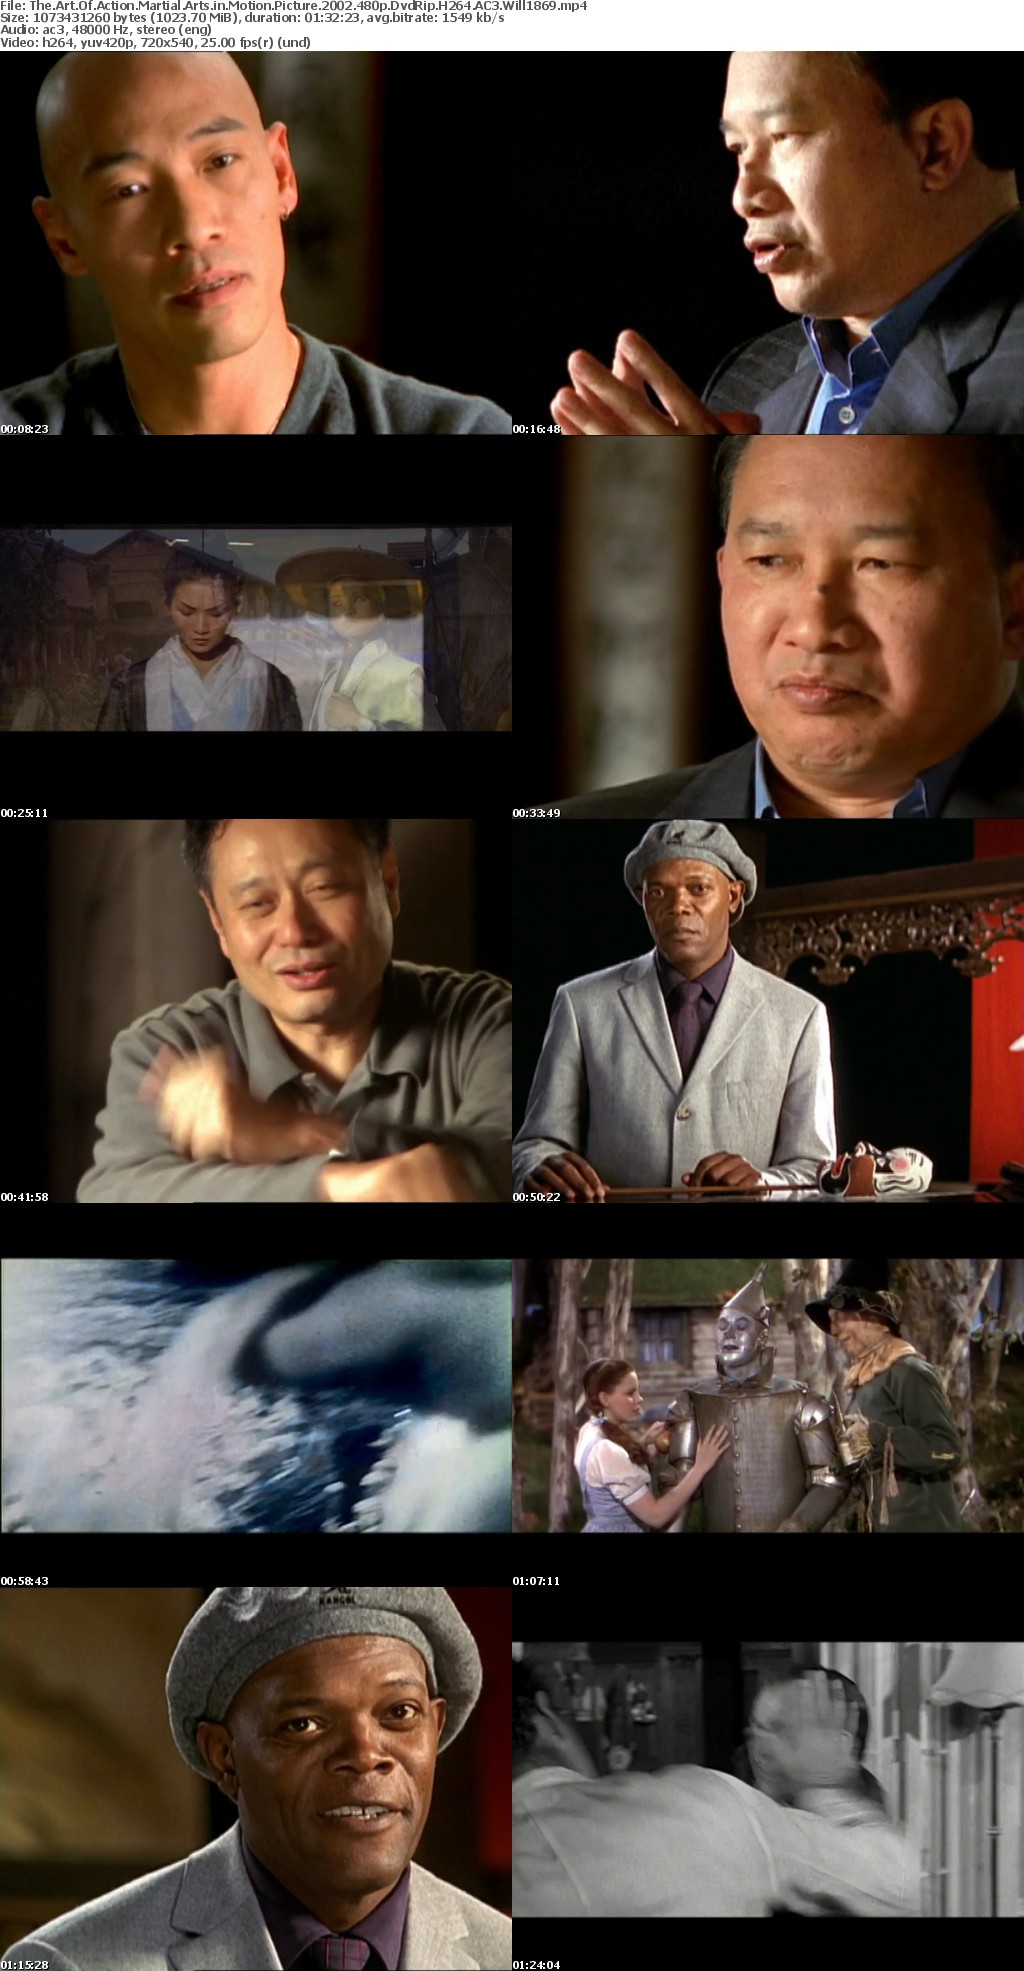 The Art Of Action Martial Arts in Motion Picture 2002 480p DvdRip H264 AC3 Will1869